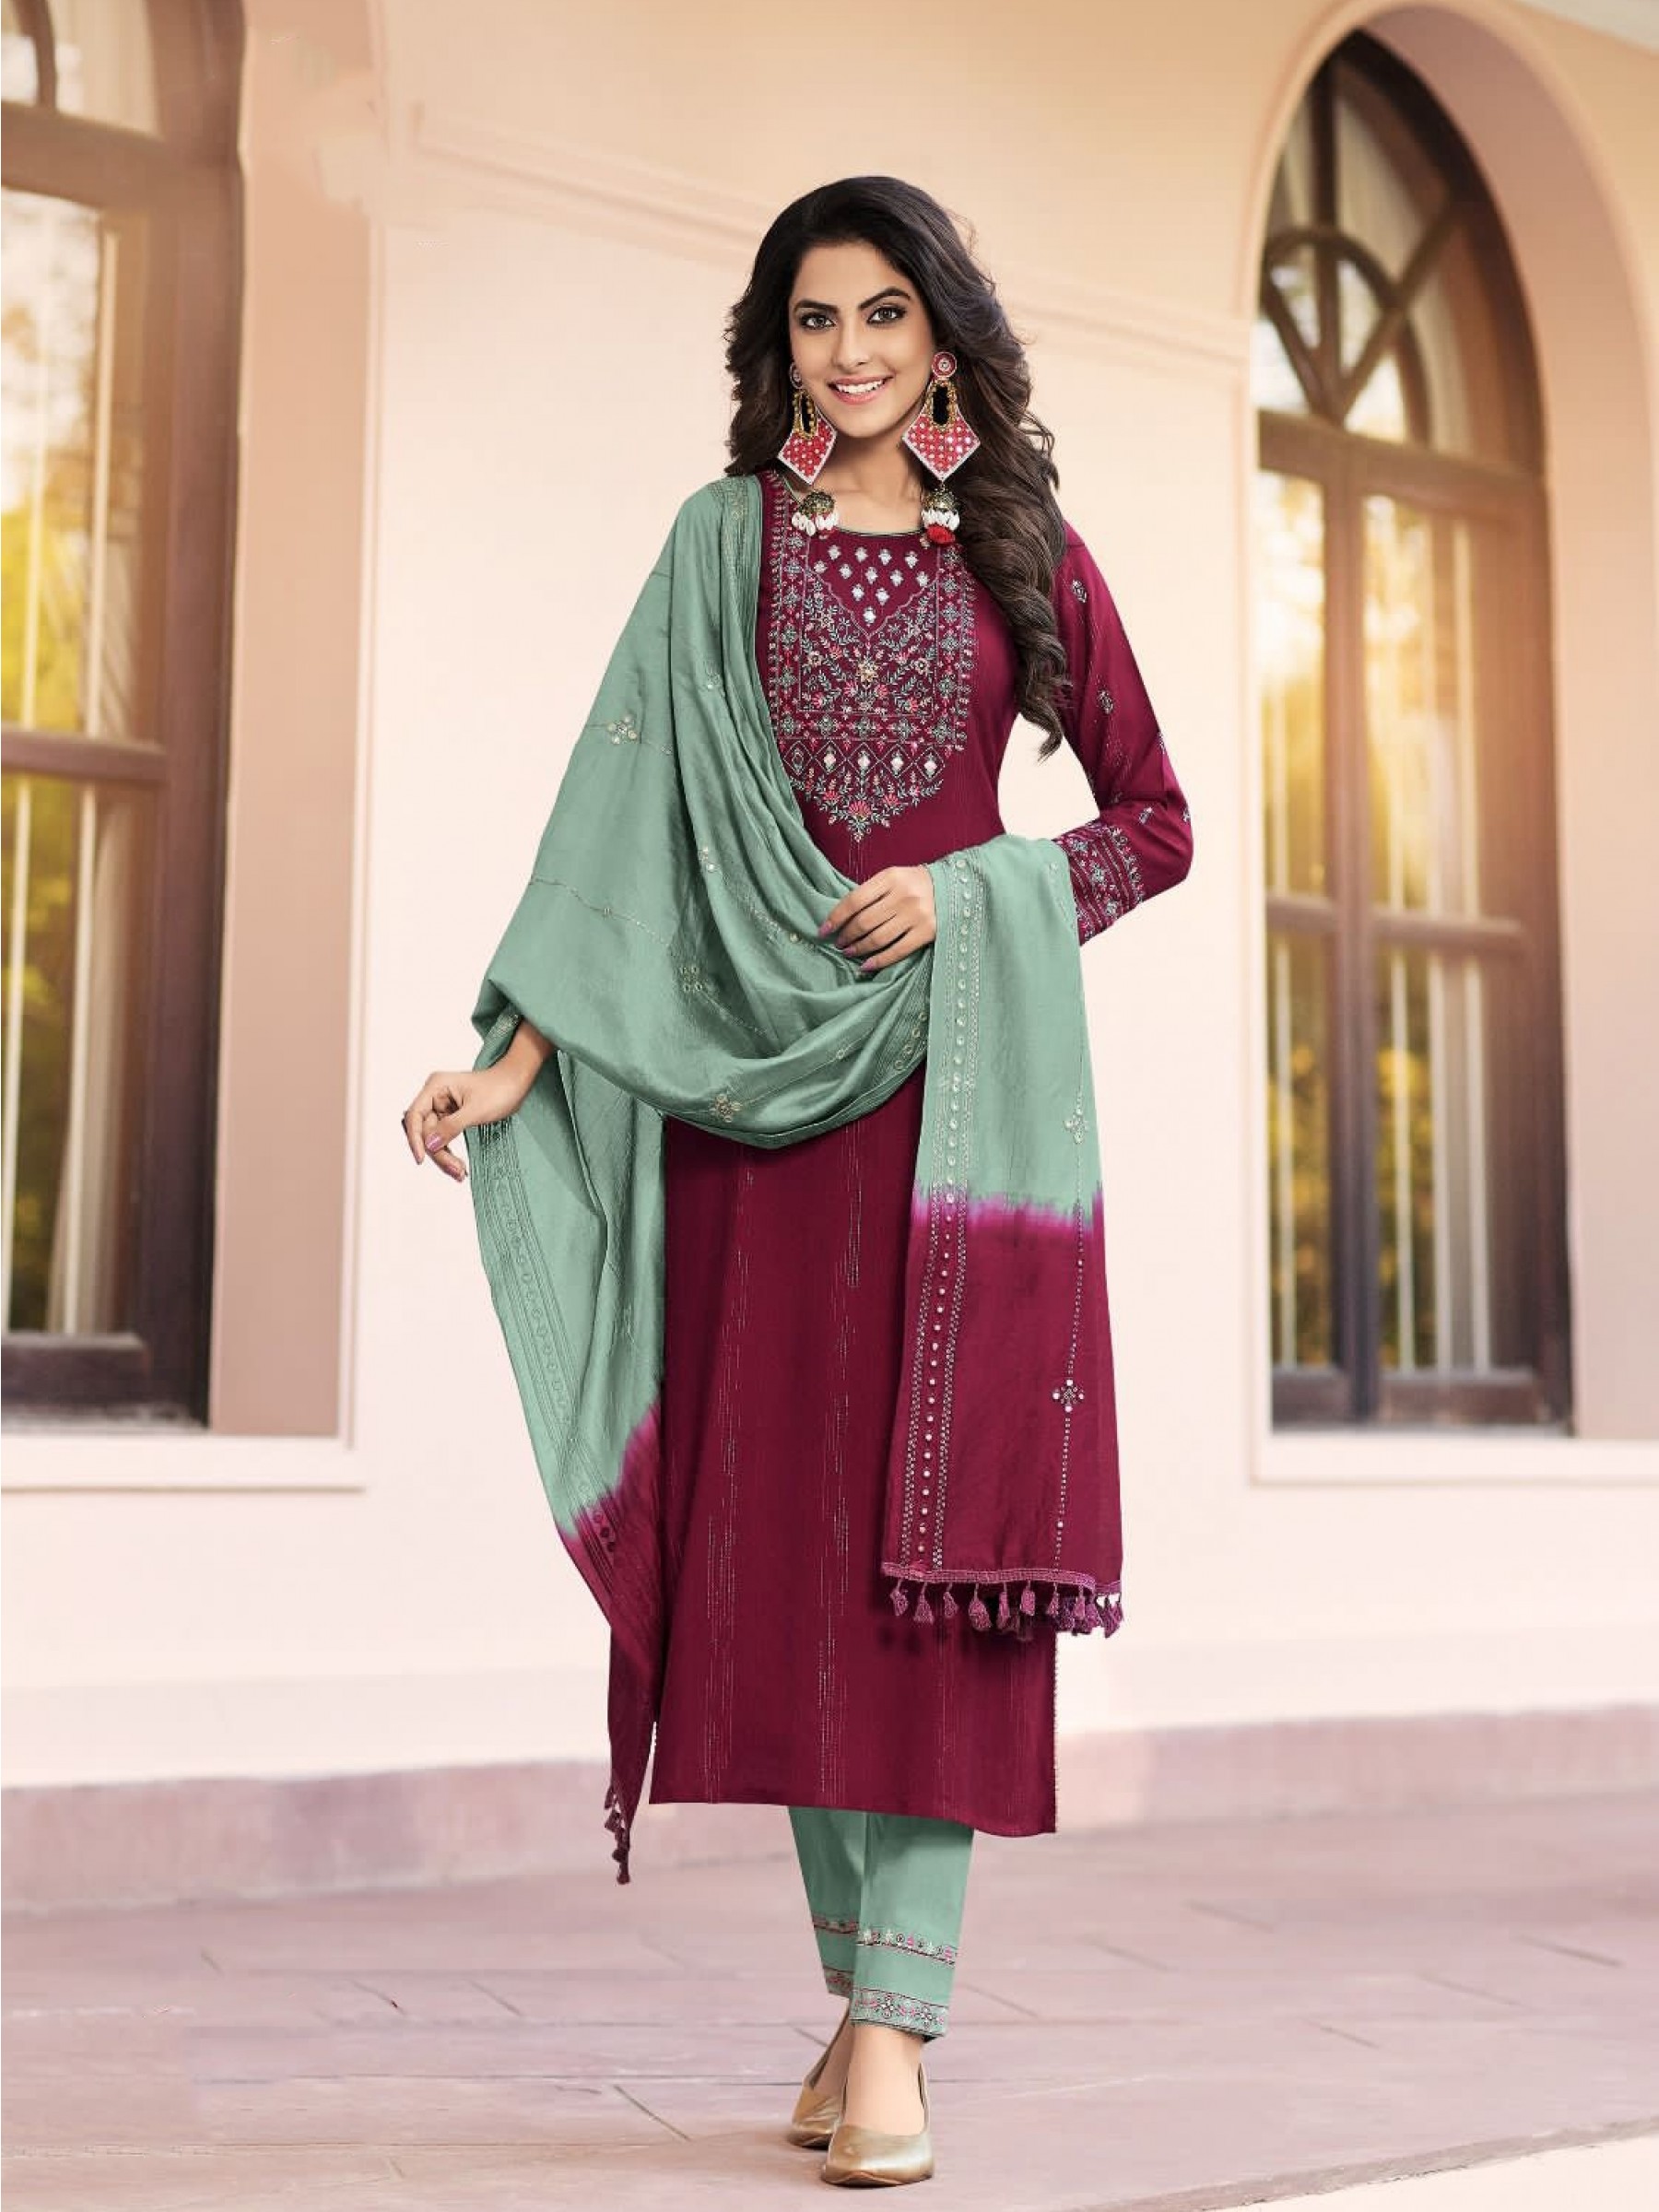 Pure Rayon Viscose Lurex Casual Wear Suit in Maroon & Turquoise Color With Embroidery Work